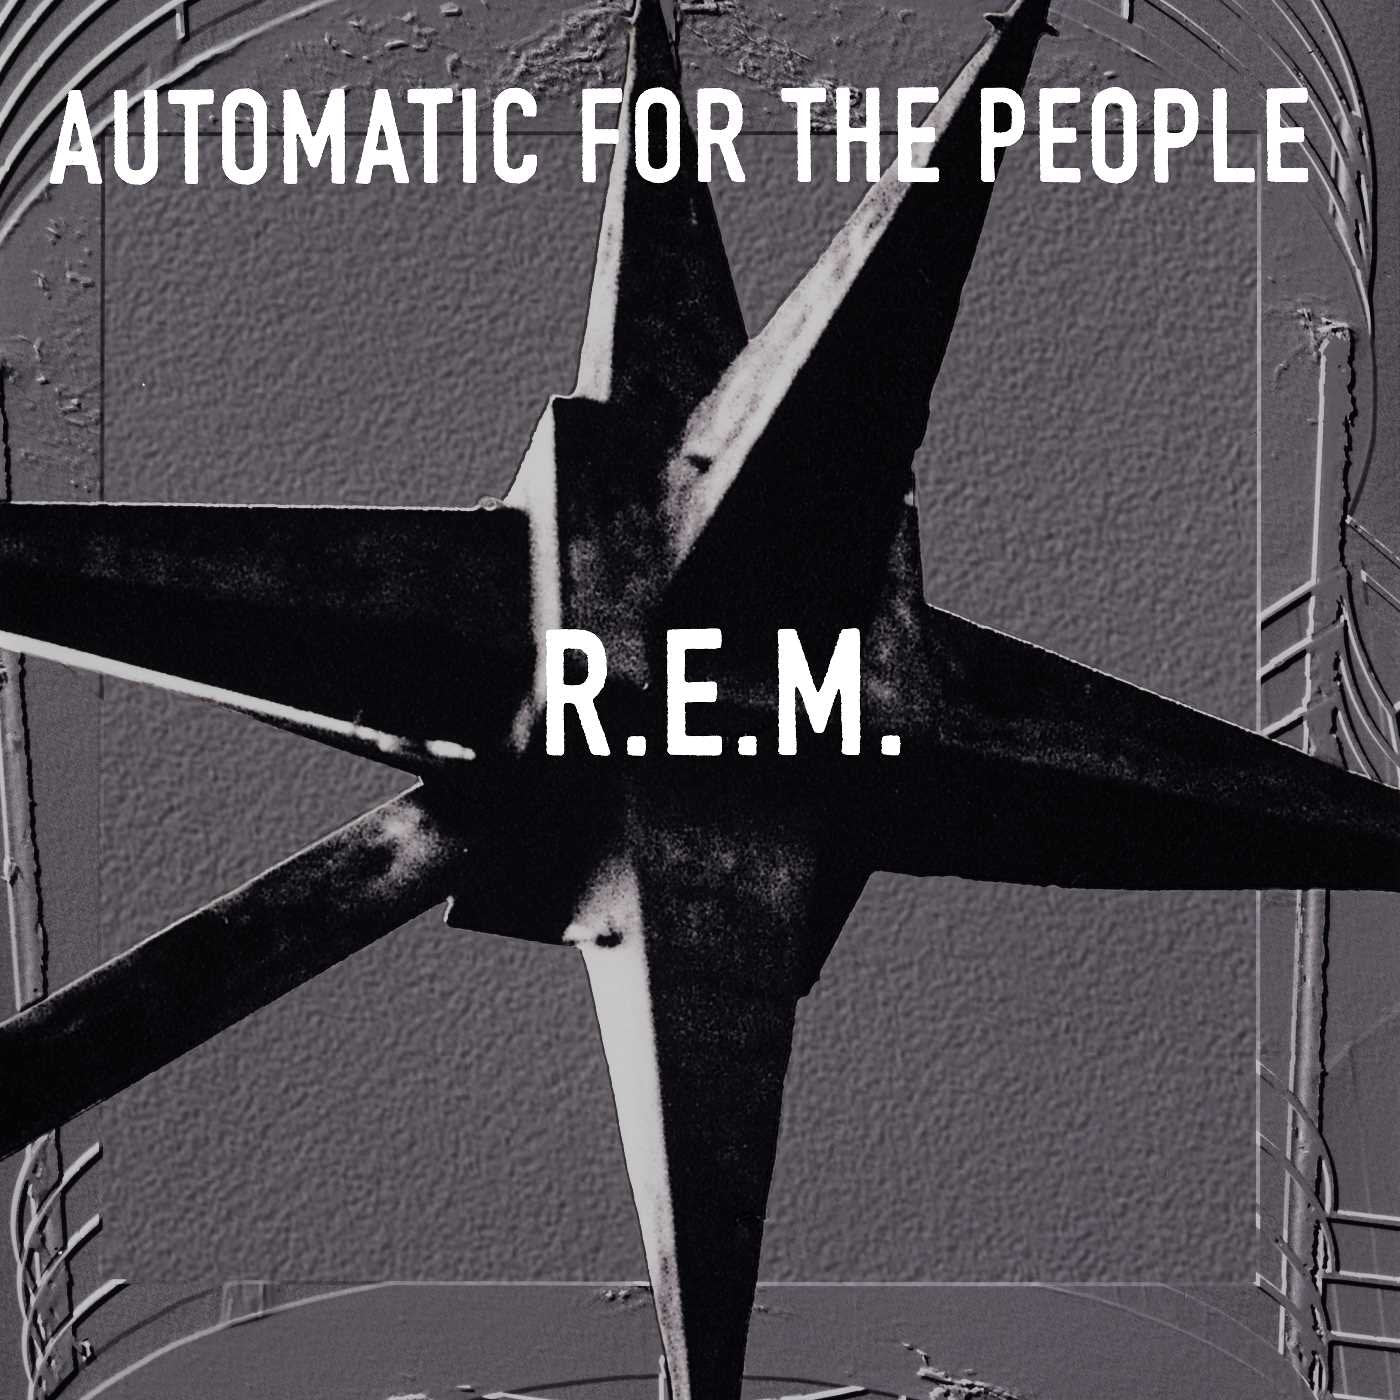 R.E.M. - AUTOMATIC FOR THE PEOPLE - 25TH ANNIVERSARY - VINYL LP